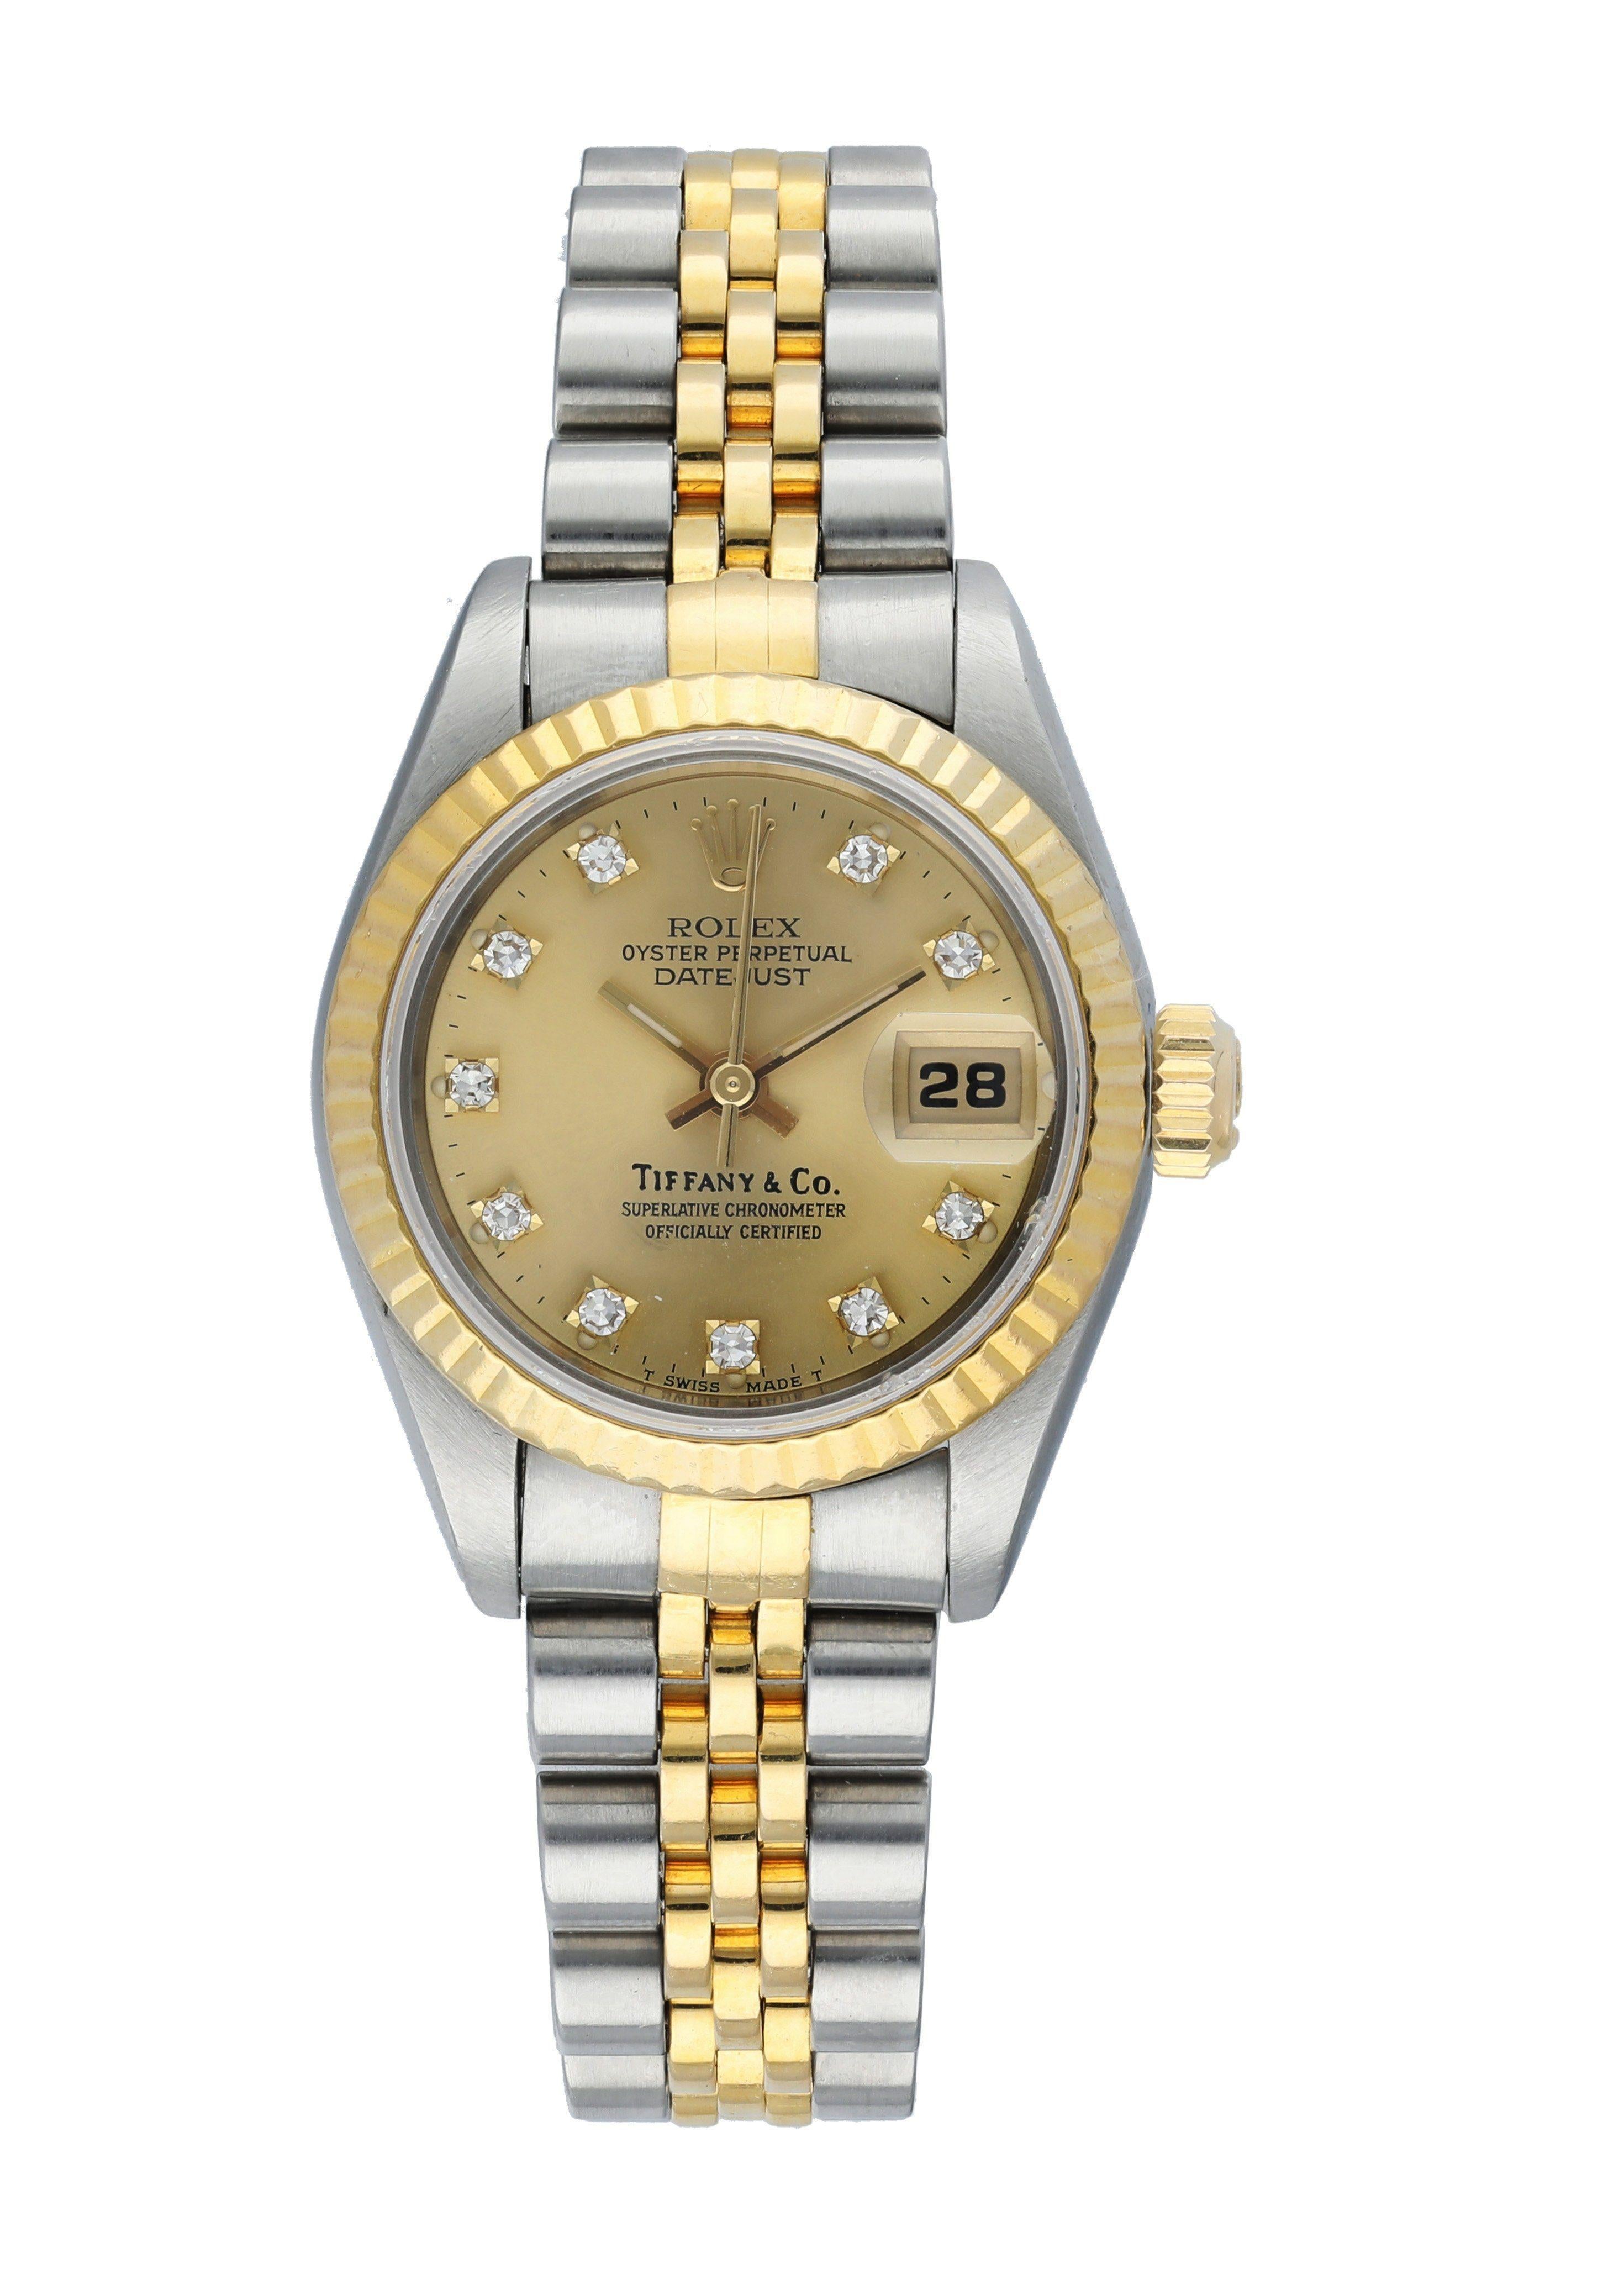 Rolex Datejust 69173 Ladies Watch. 
26mm Stainless Steel case. 
Yellow Gold Fluted Bezel. 
Champagne dial with gold hands and factory set diamond hour markers. Tiffany & Co. Stamp on Dial. 
Minute markers on the outer dial. 
Date display at the 3